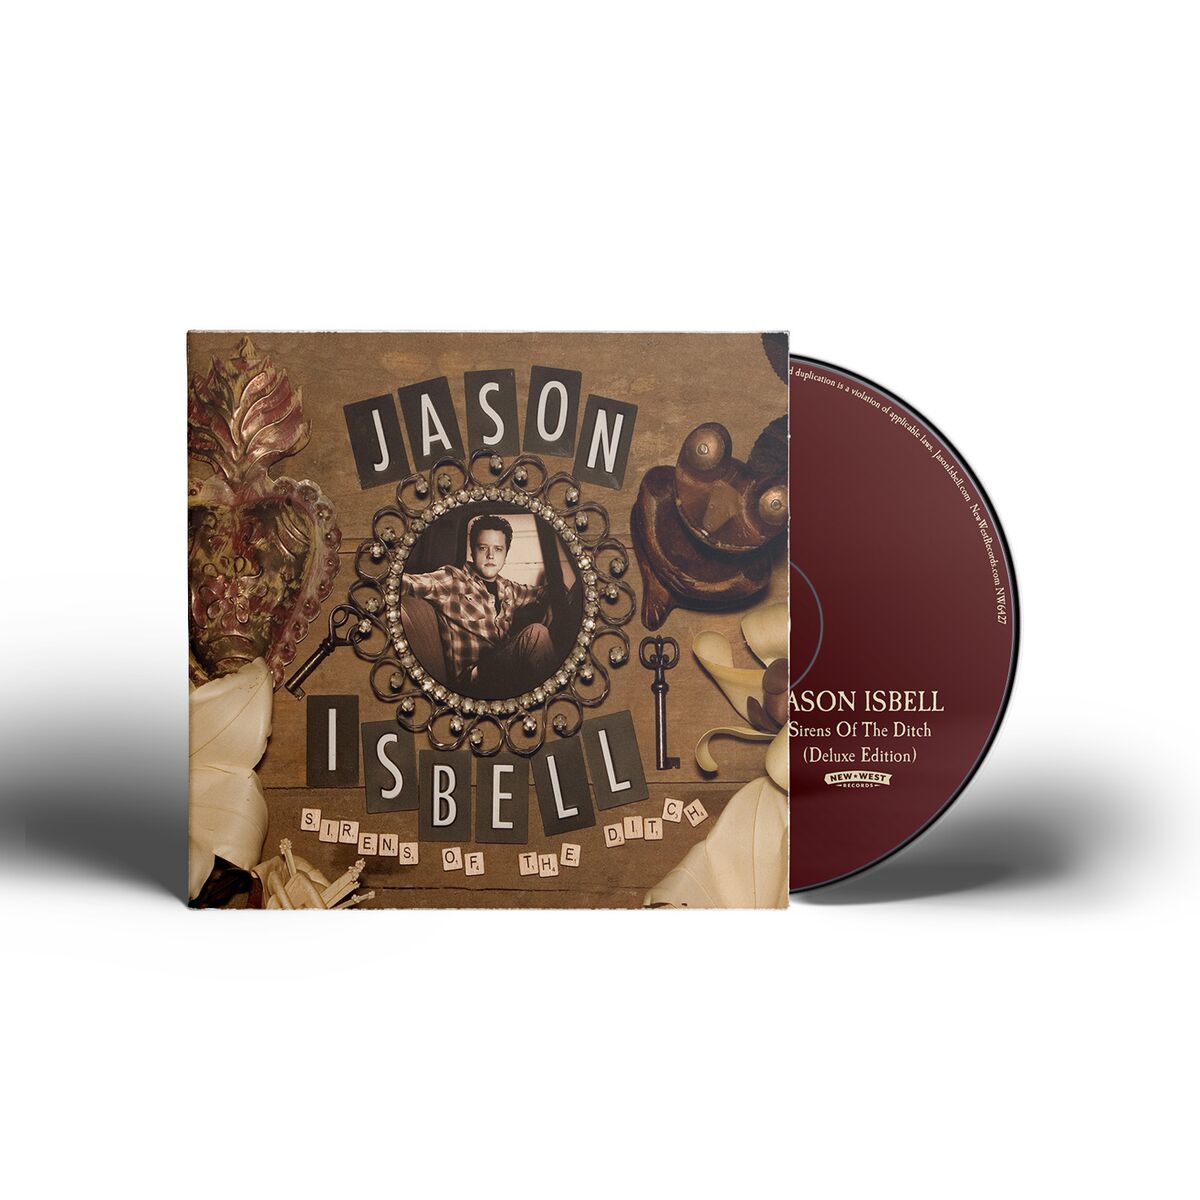 Jason Isbell - Sirens Of The Ditch (Deluxe Edition) [CD]